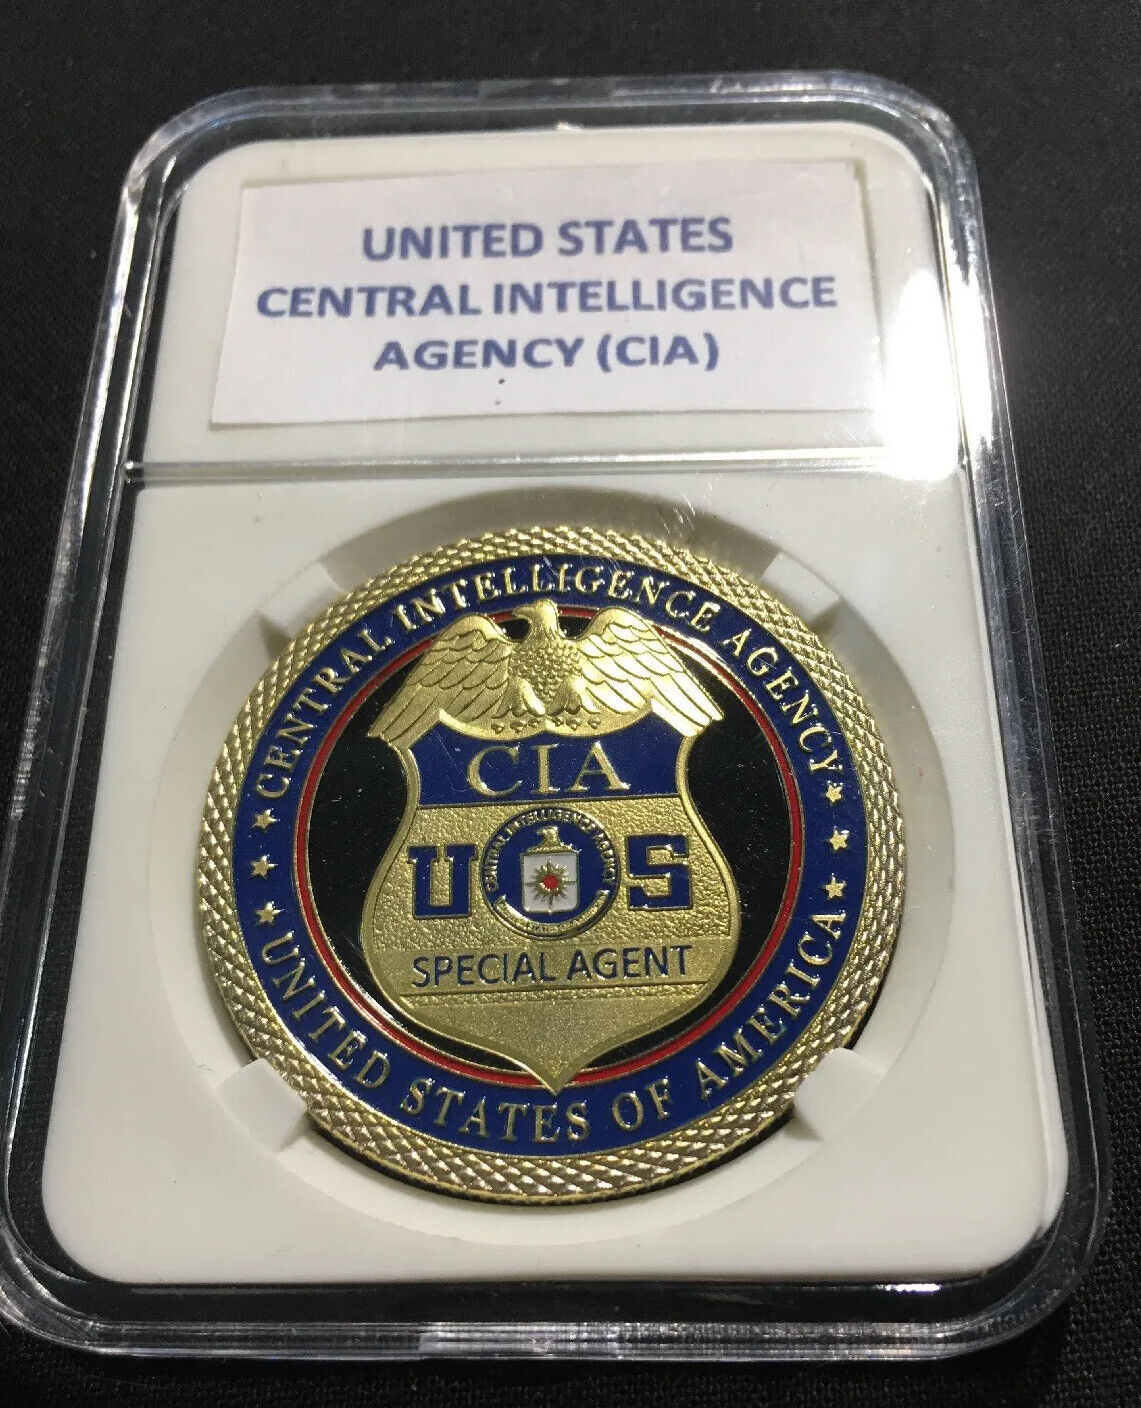 CIA United States Central Intelligence Agency Special Agent Challenge Coin G-20